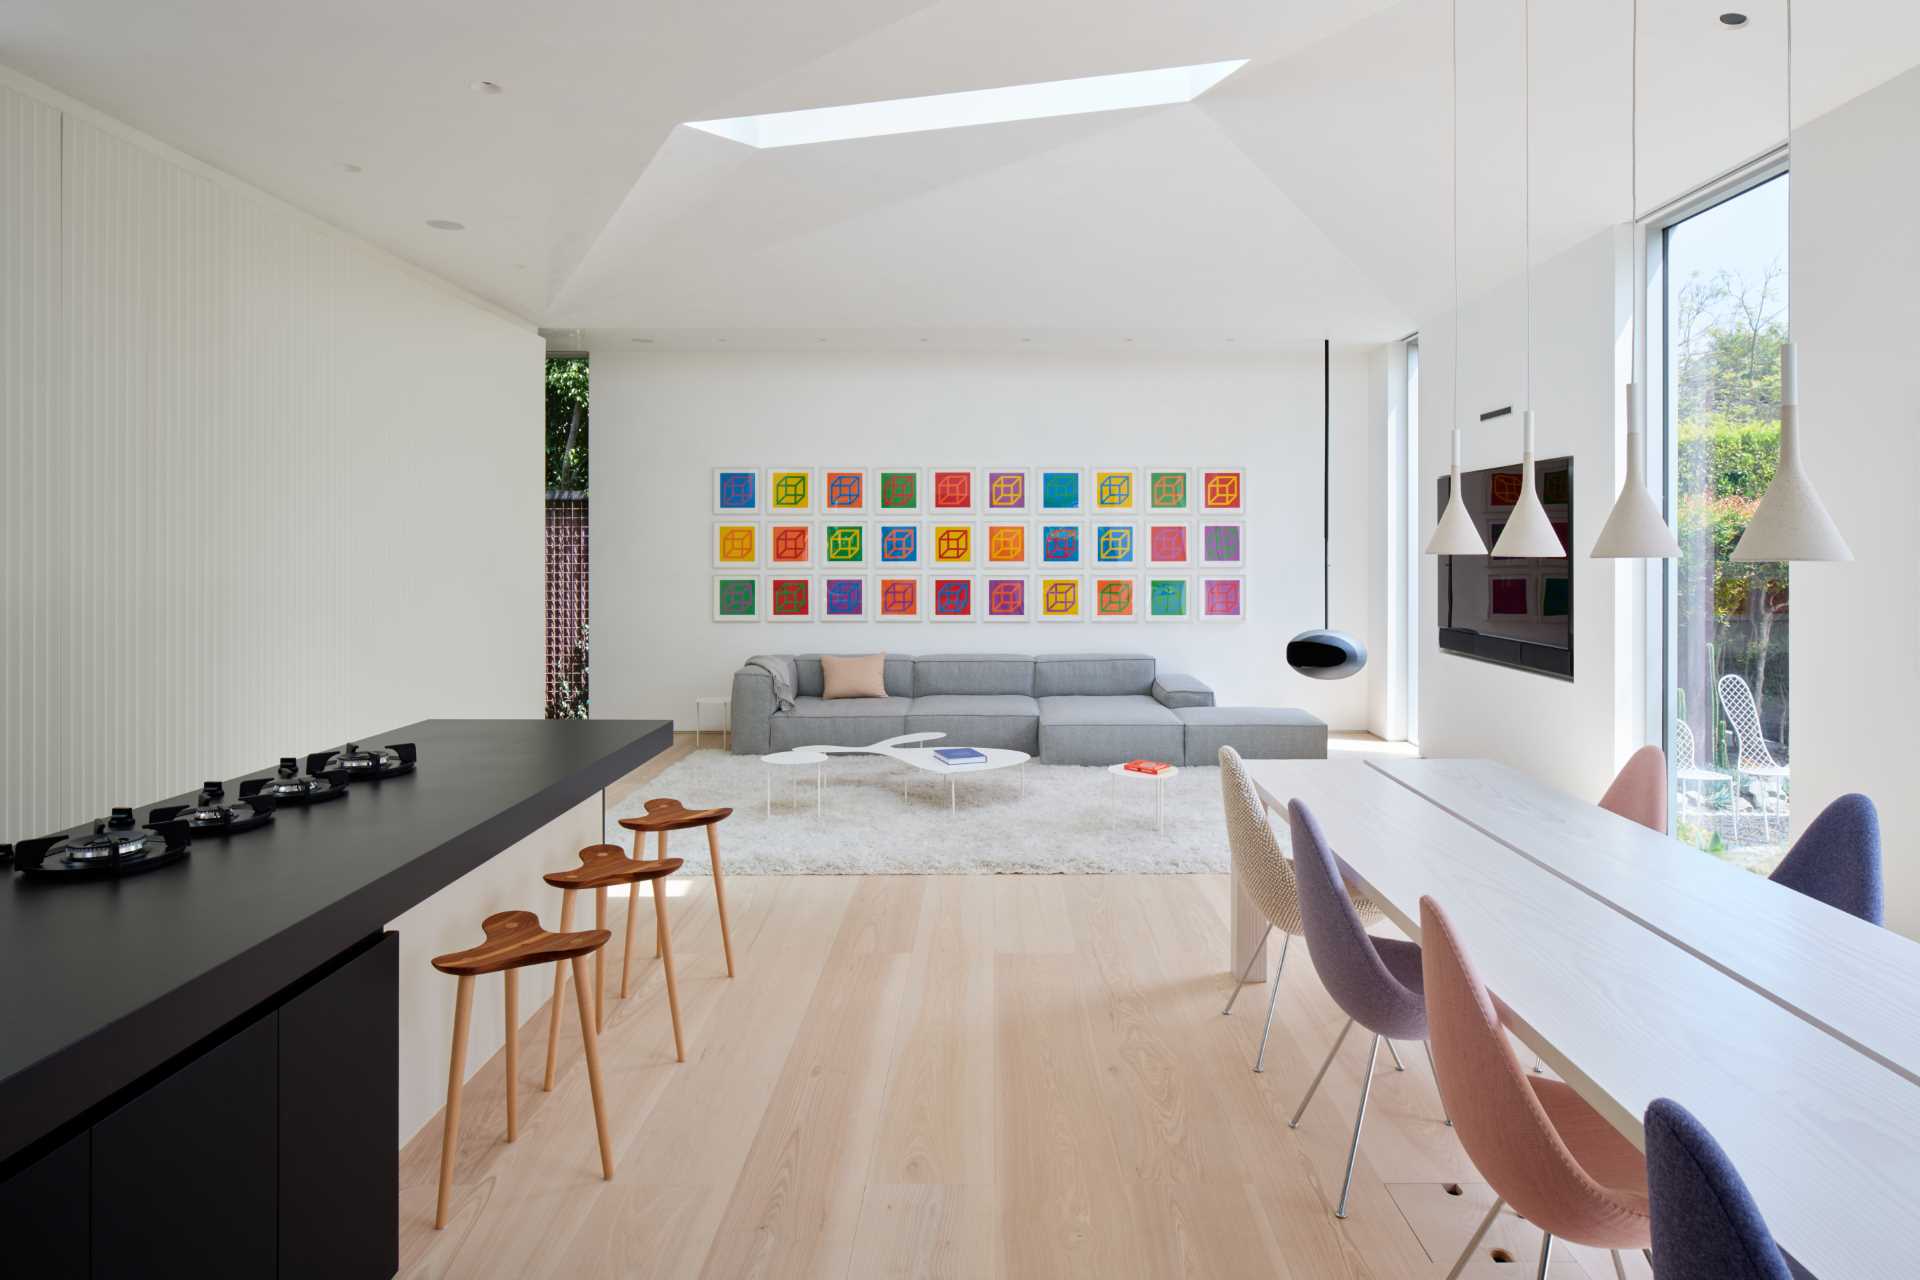 This spacious, light-flooded living room has colorful artwork by Sol LeWitt and a Cocoon Aeris suspended black fireplace.